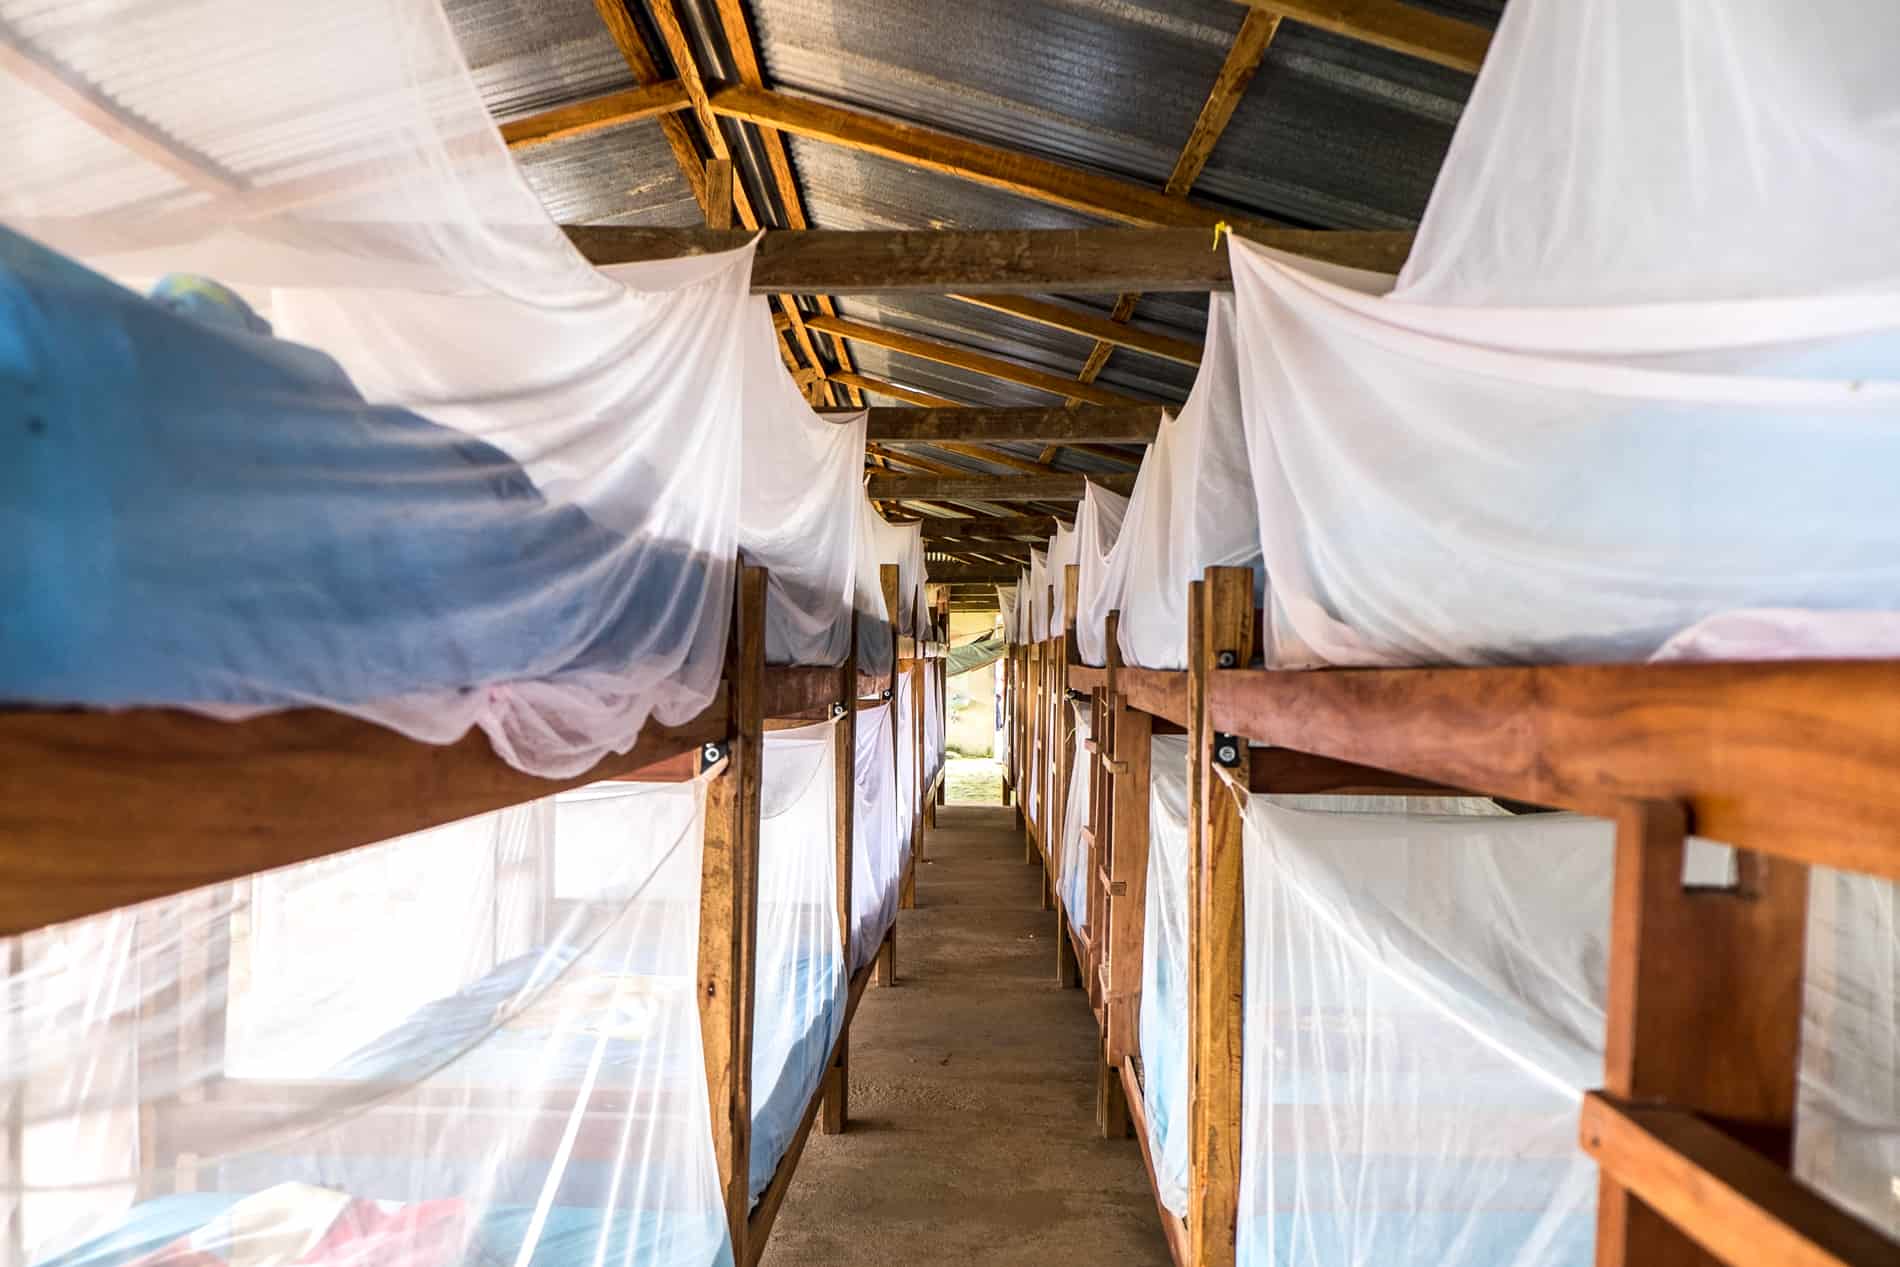 Wooden bunk beds with white mosquito nets at a Lost City trek camp. 